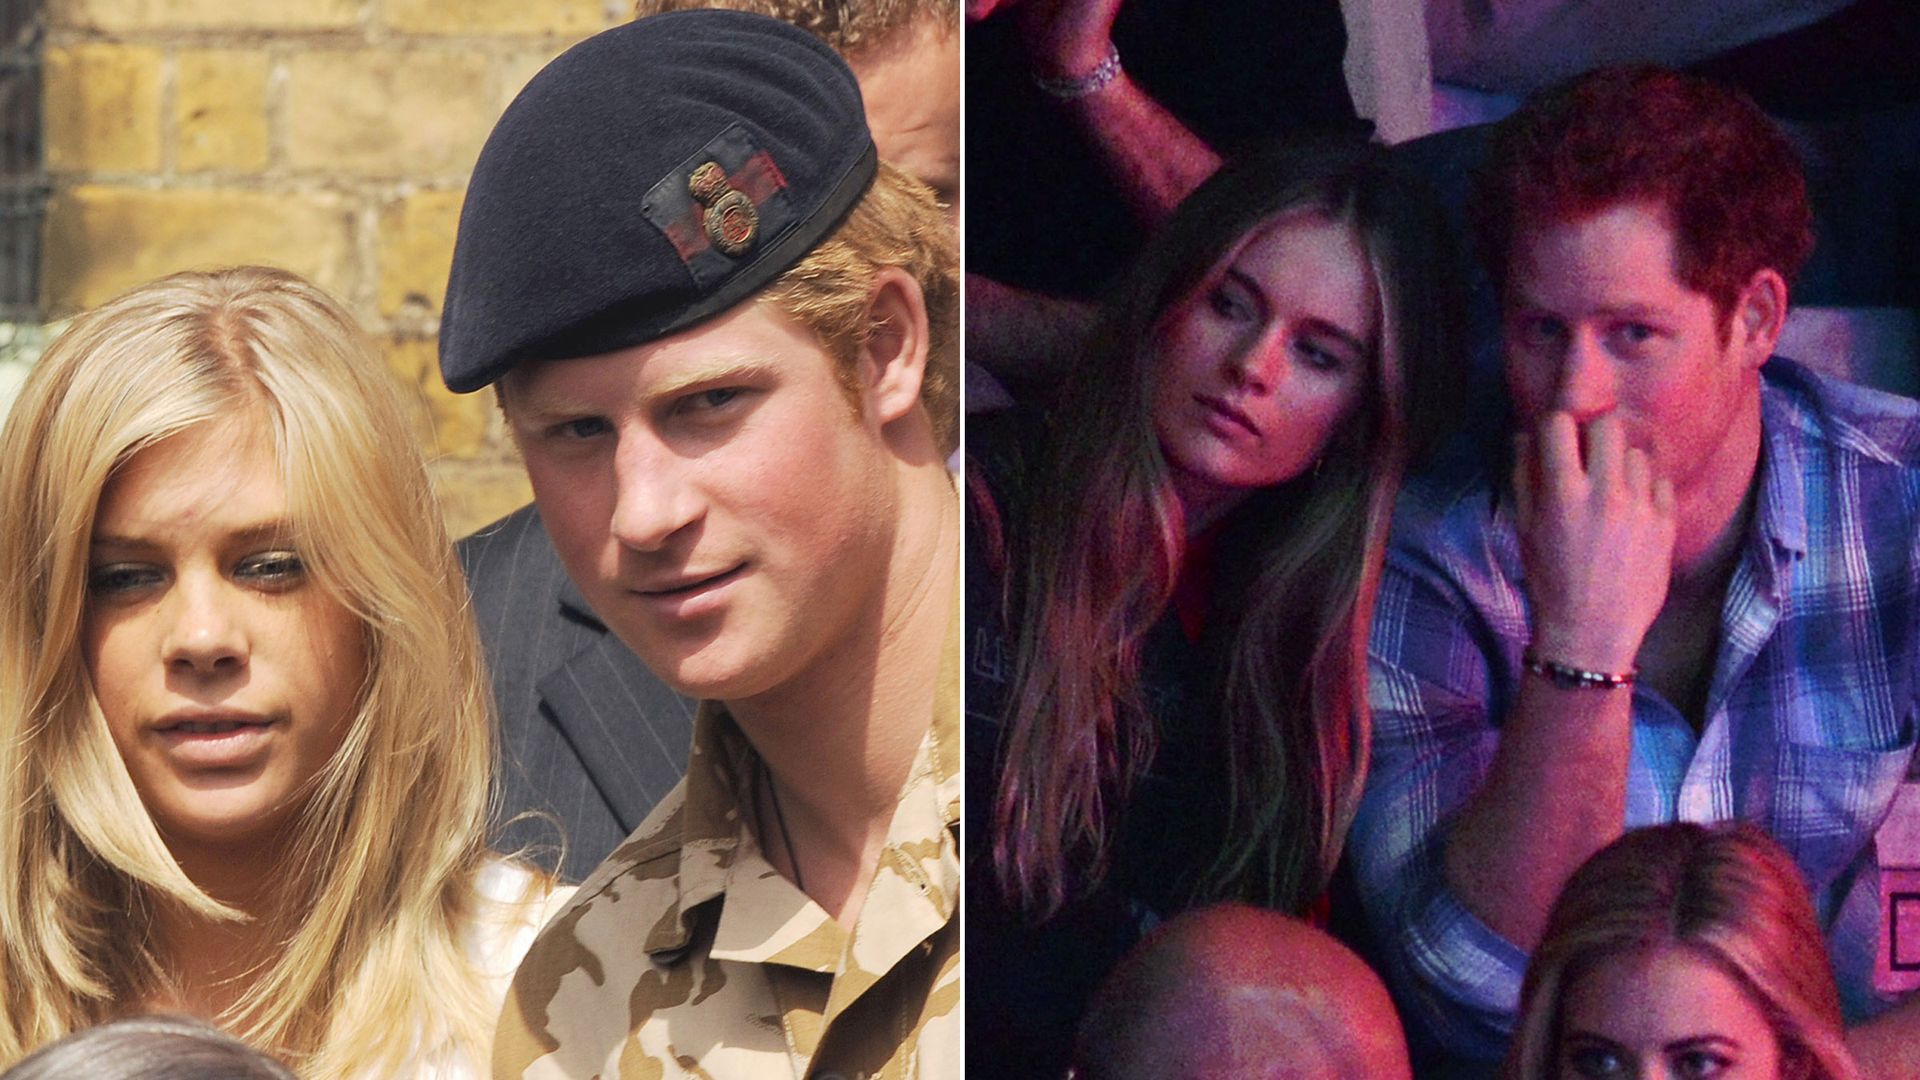 Prince Harry with exes Chelsy Davy and Cressida Bonas